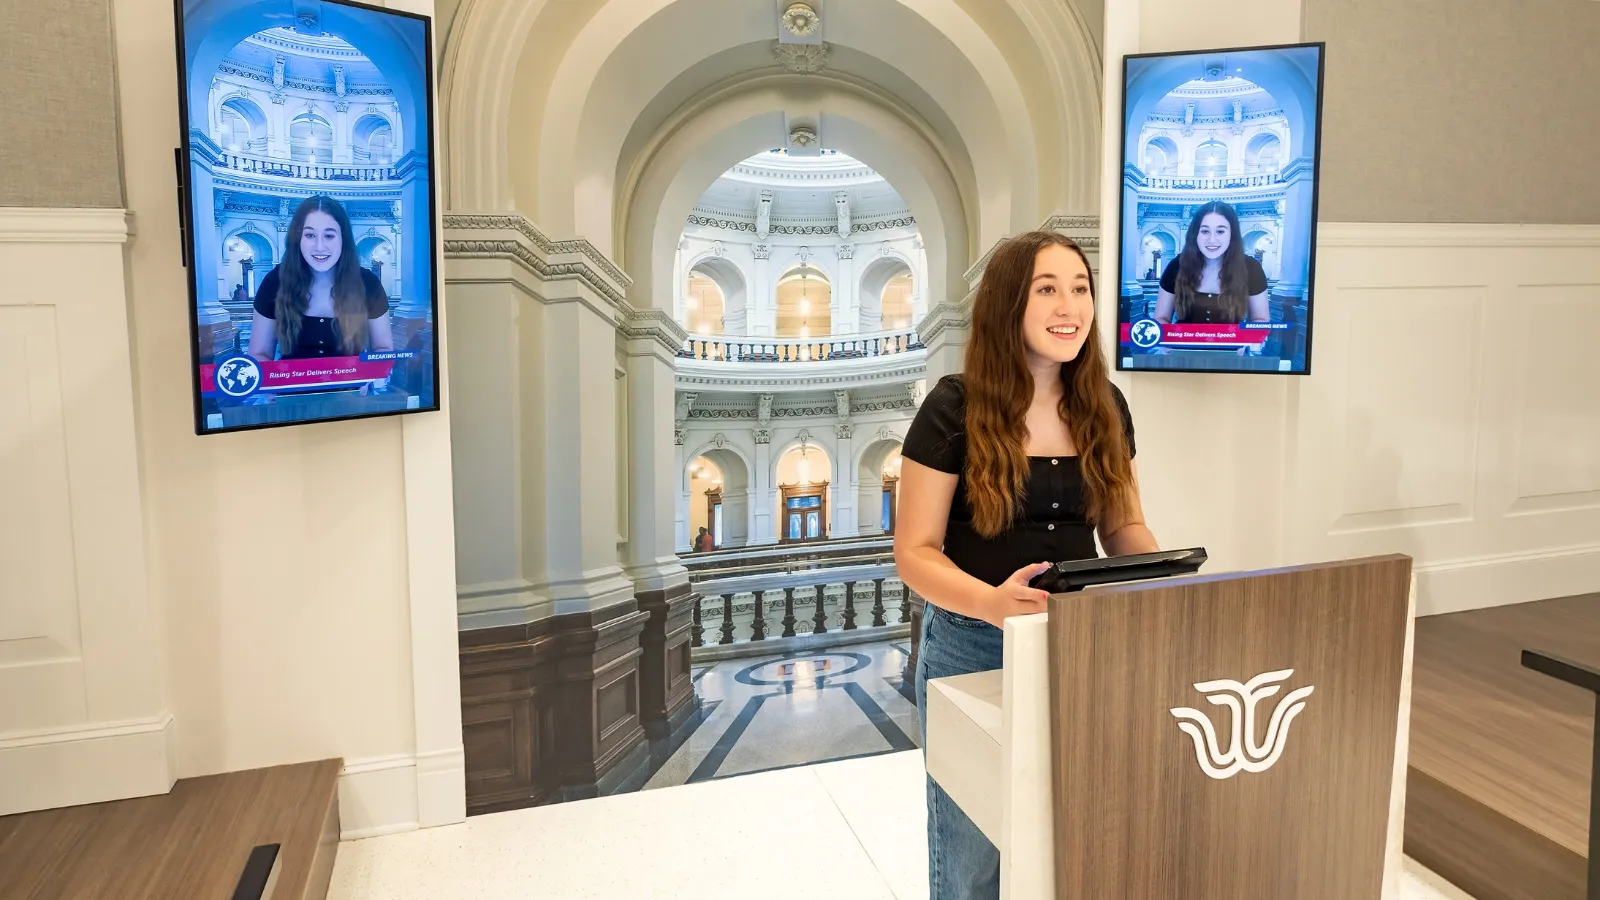 Student delivers a Texas women leader's speech at the podium in the gallery.